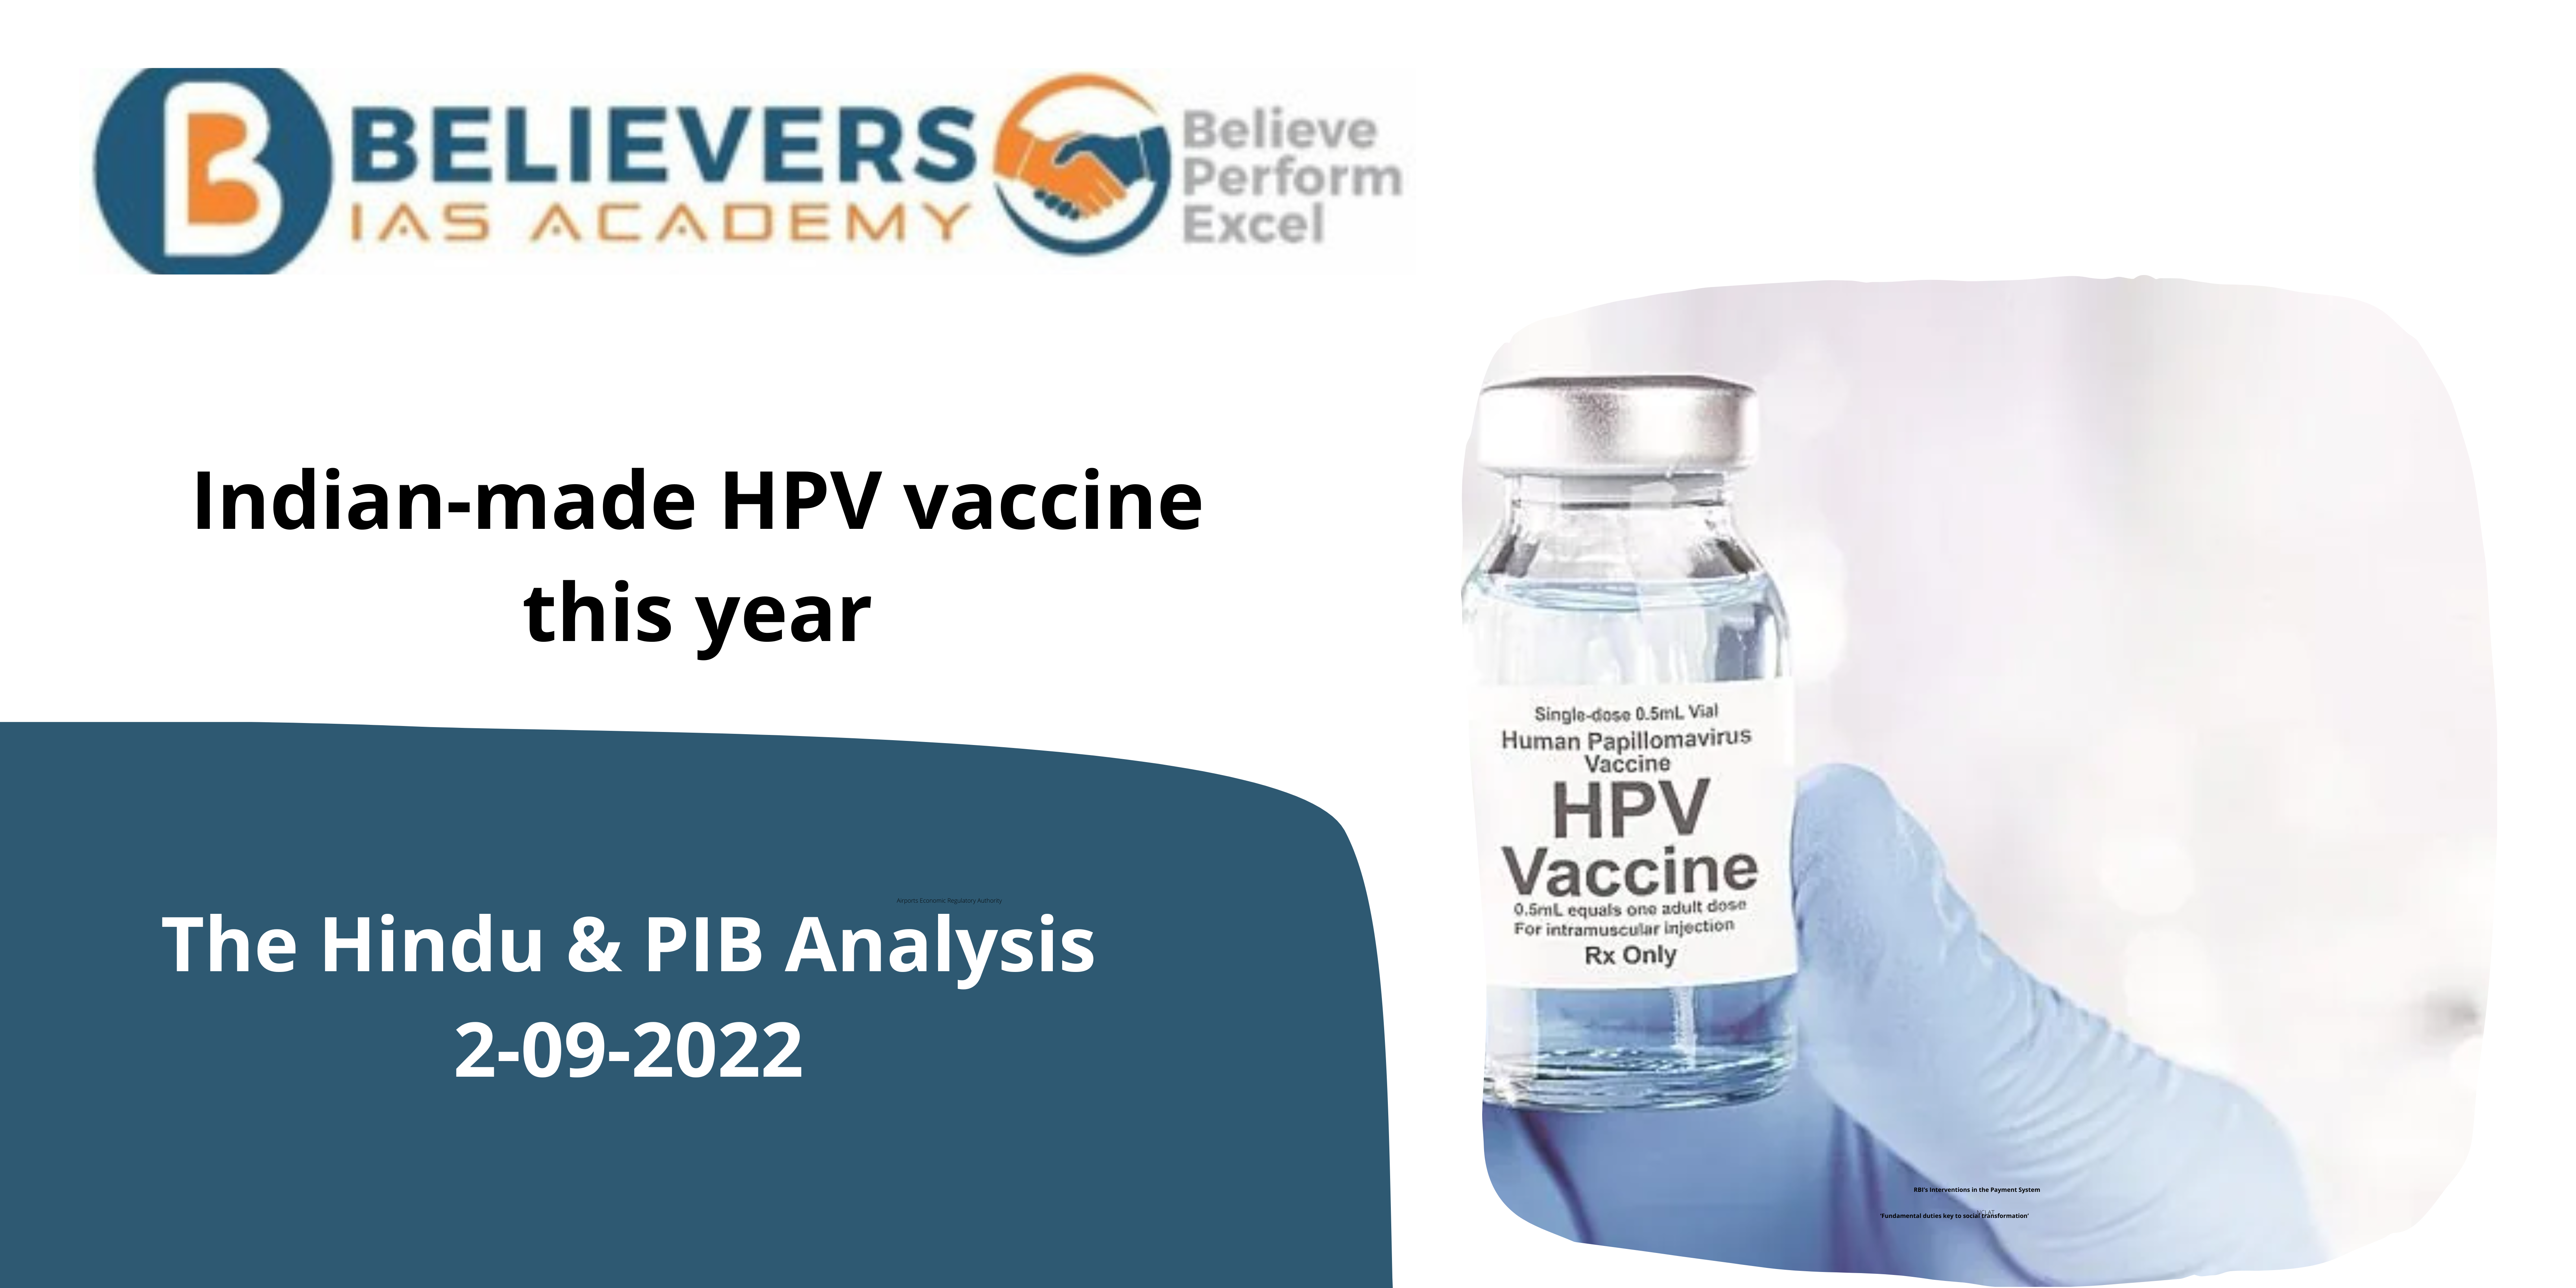 Indian-made HPV vaccine this year